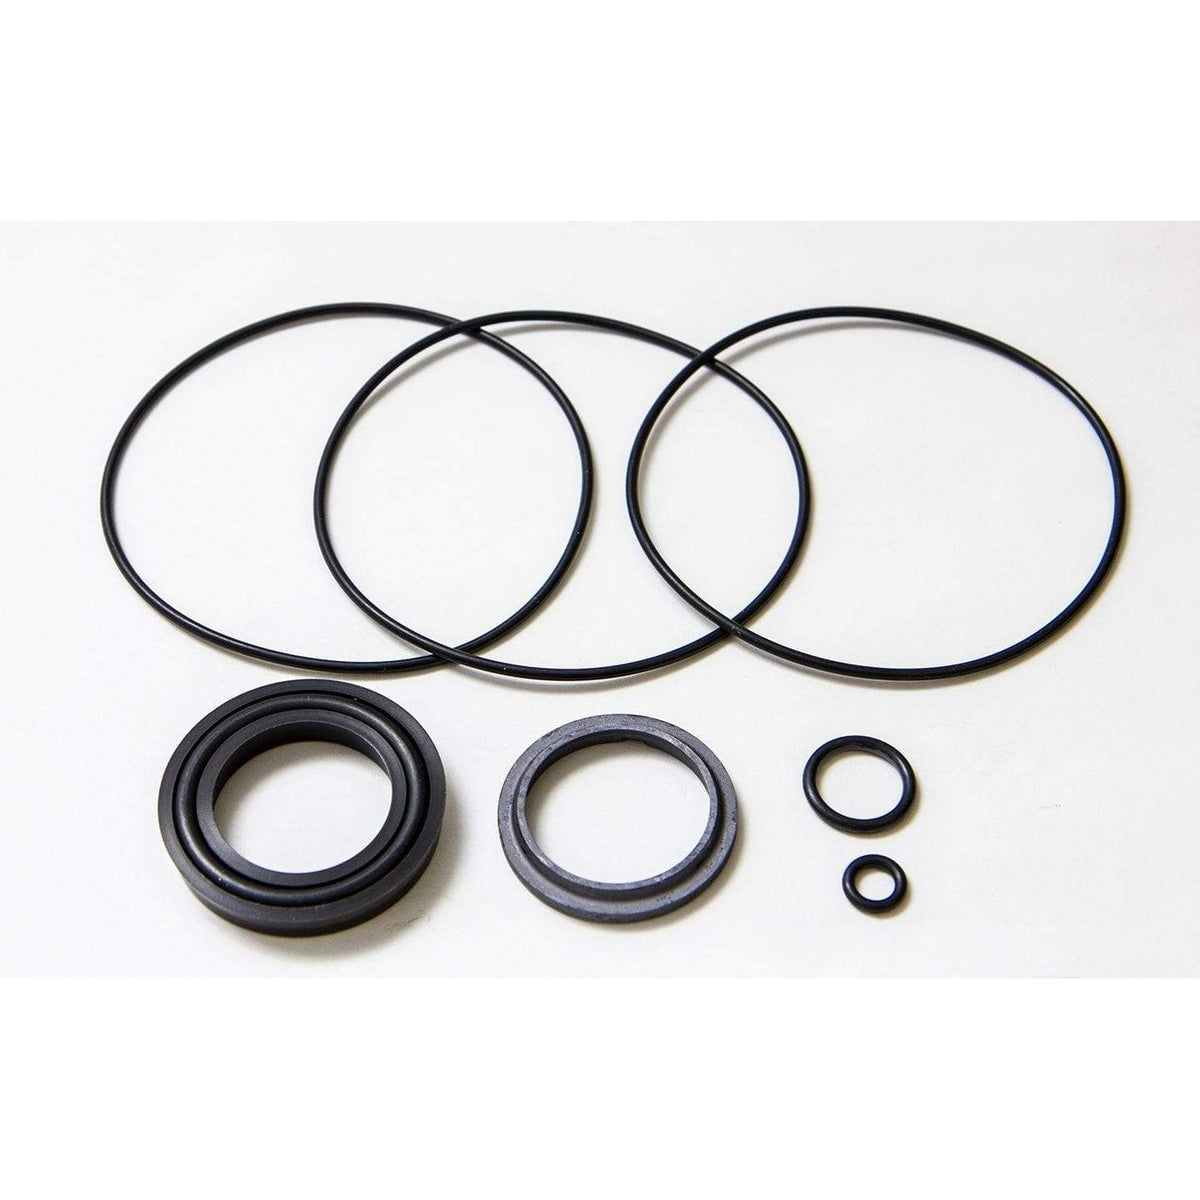 Teleflex Not Qualified for Free Shipping Teleflex Helm Seal Kit-60-Series #HS-06